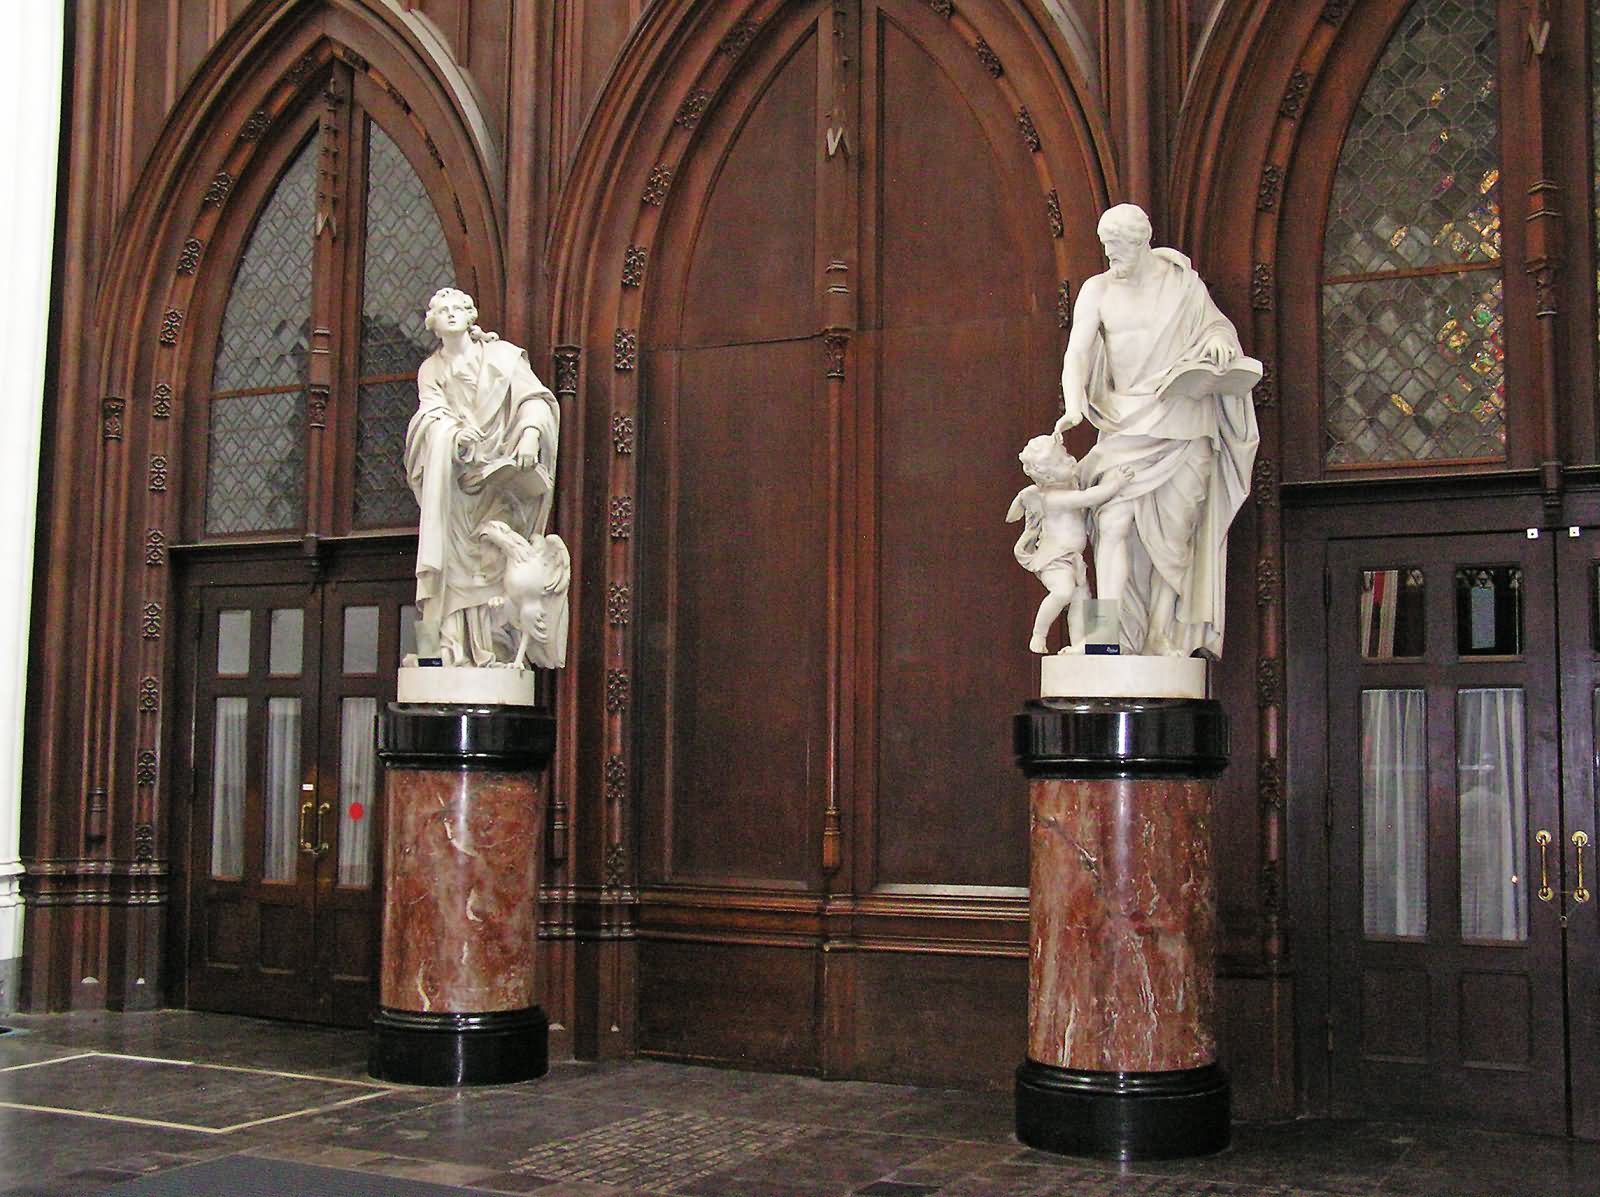 Beautiful Statues Inside The Cathedral of St. Michael and St. Gudula In Belgium